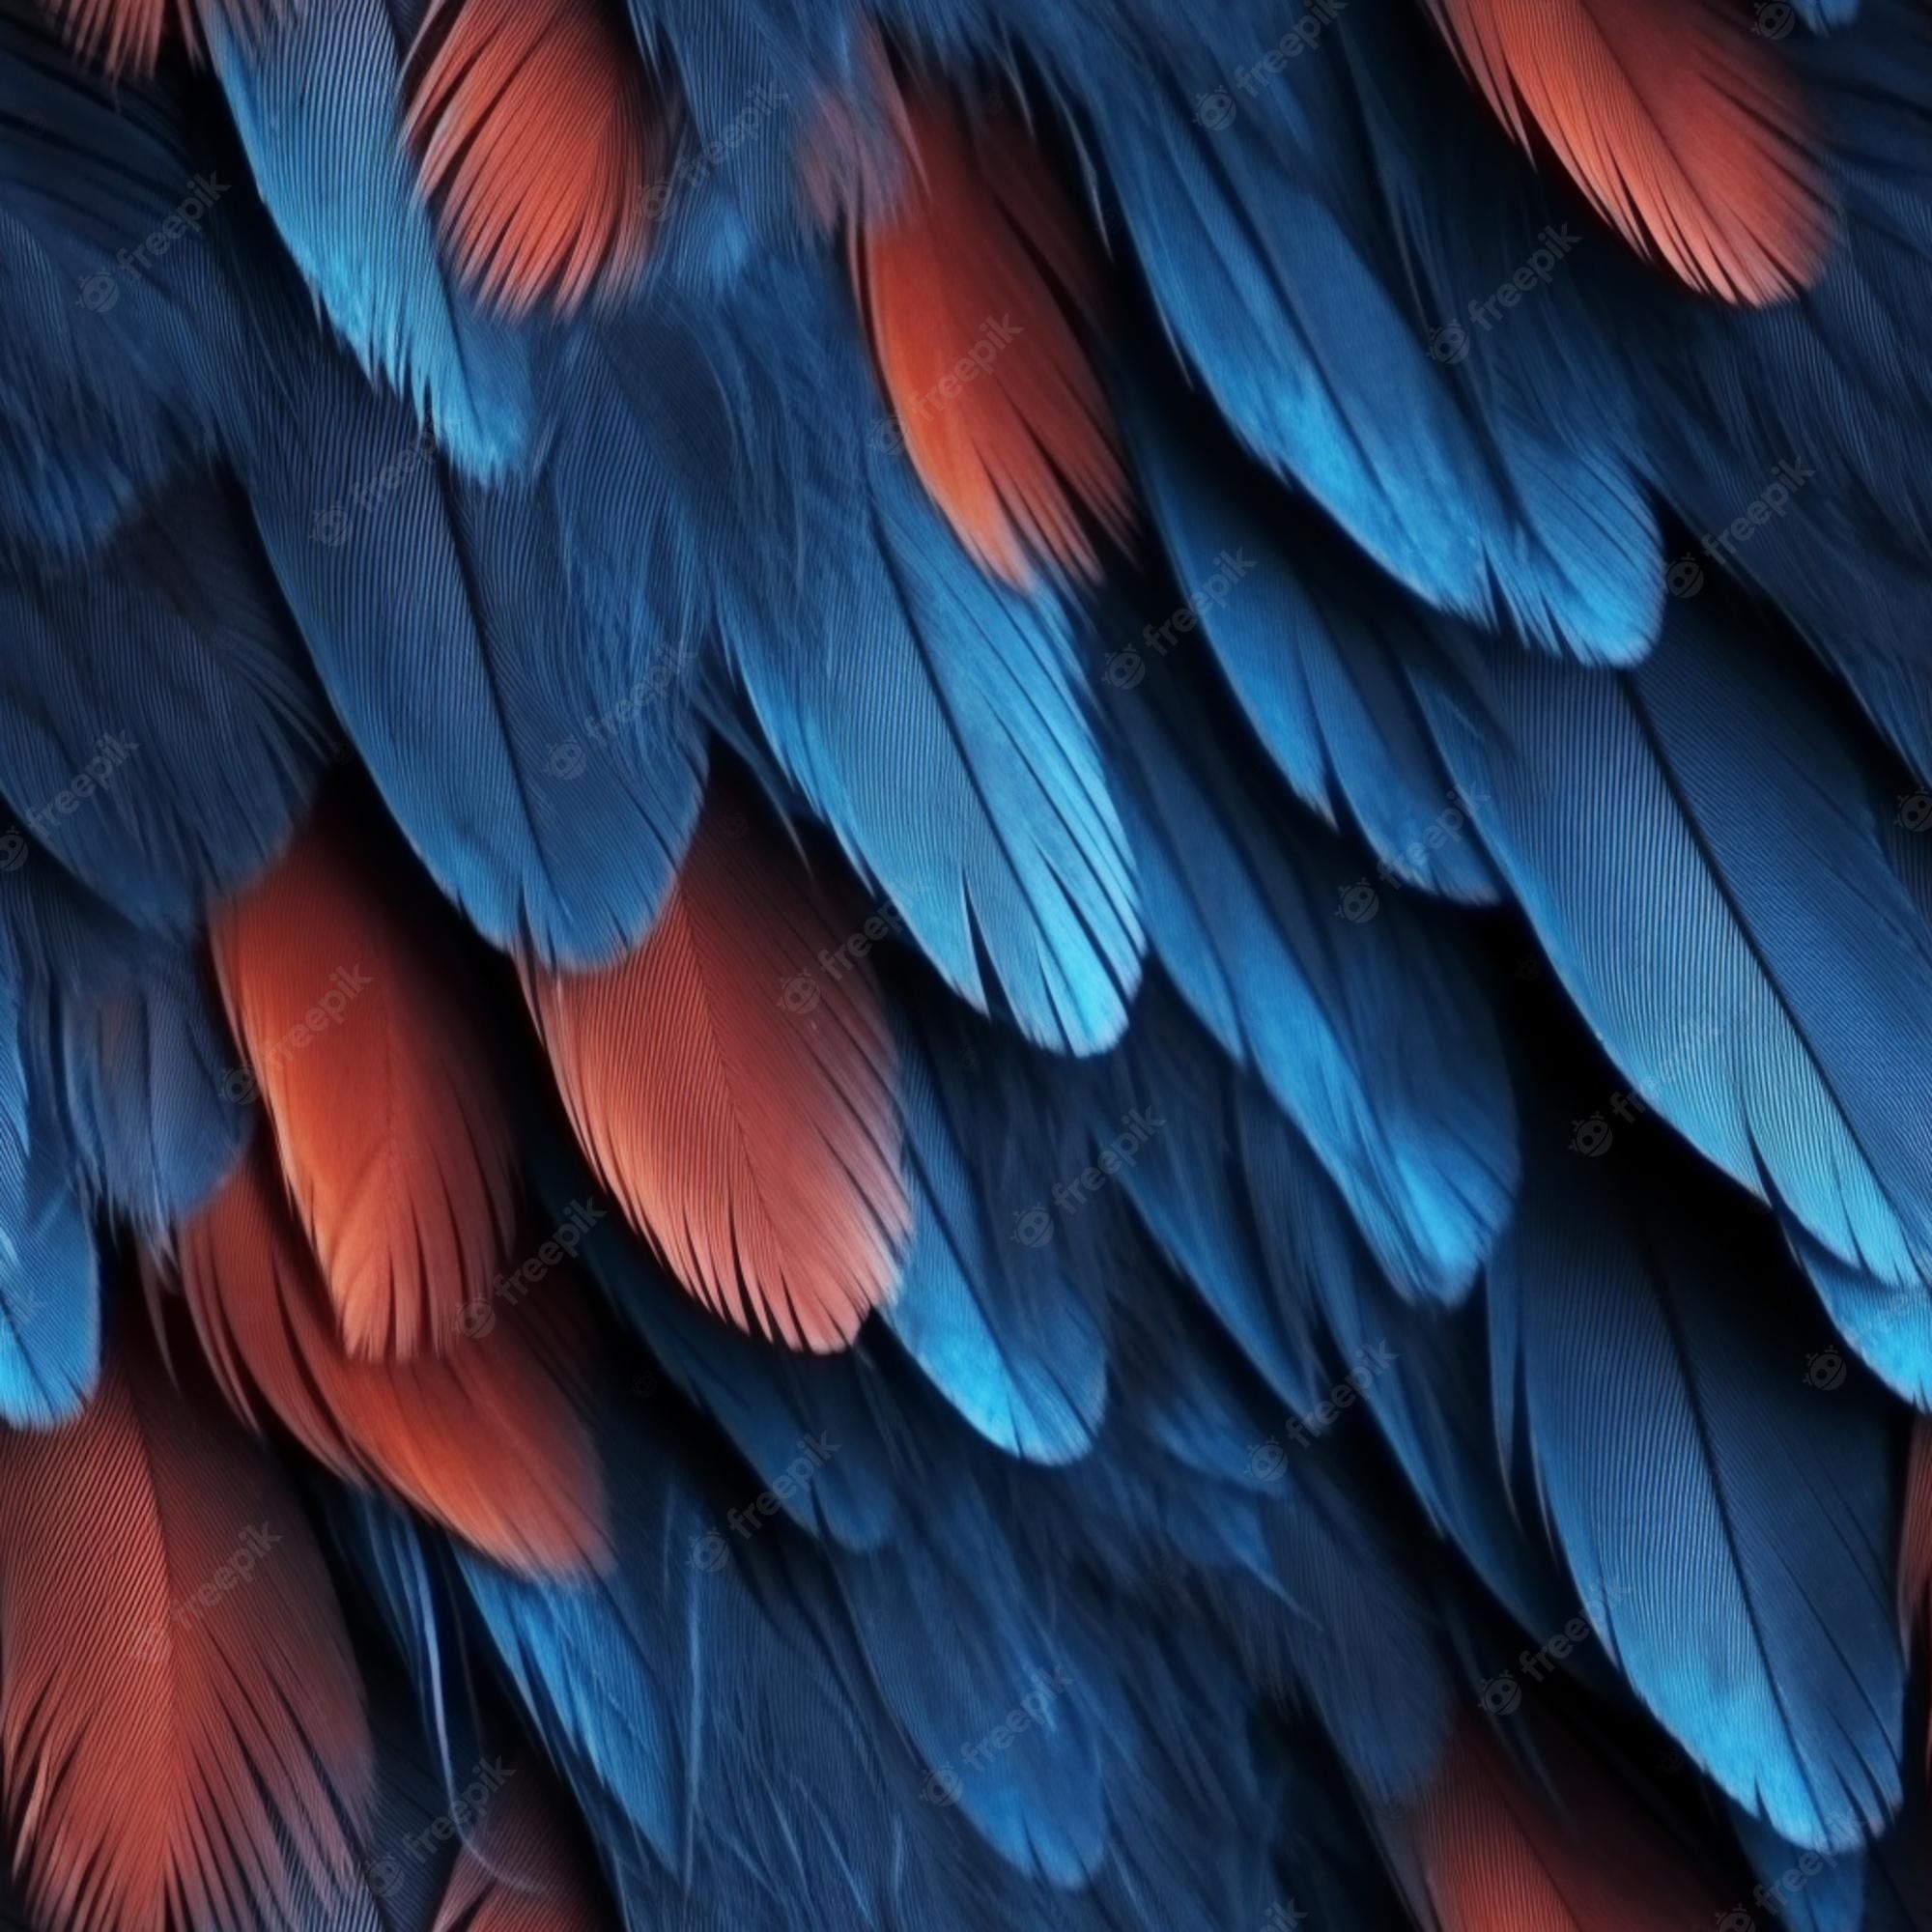 Blue and red feathers of a parrot, close up - Wings